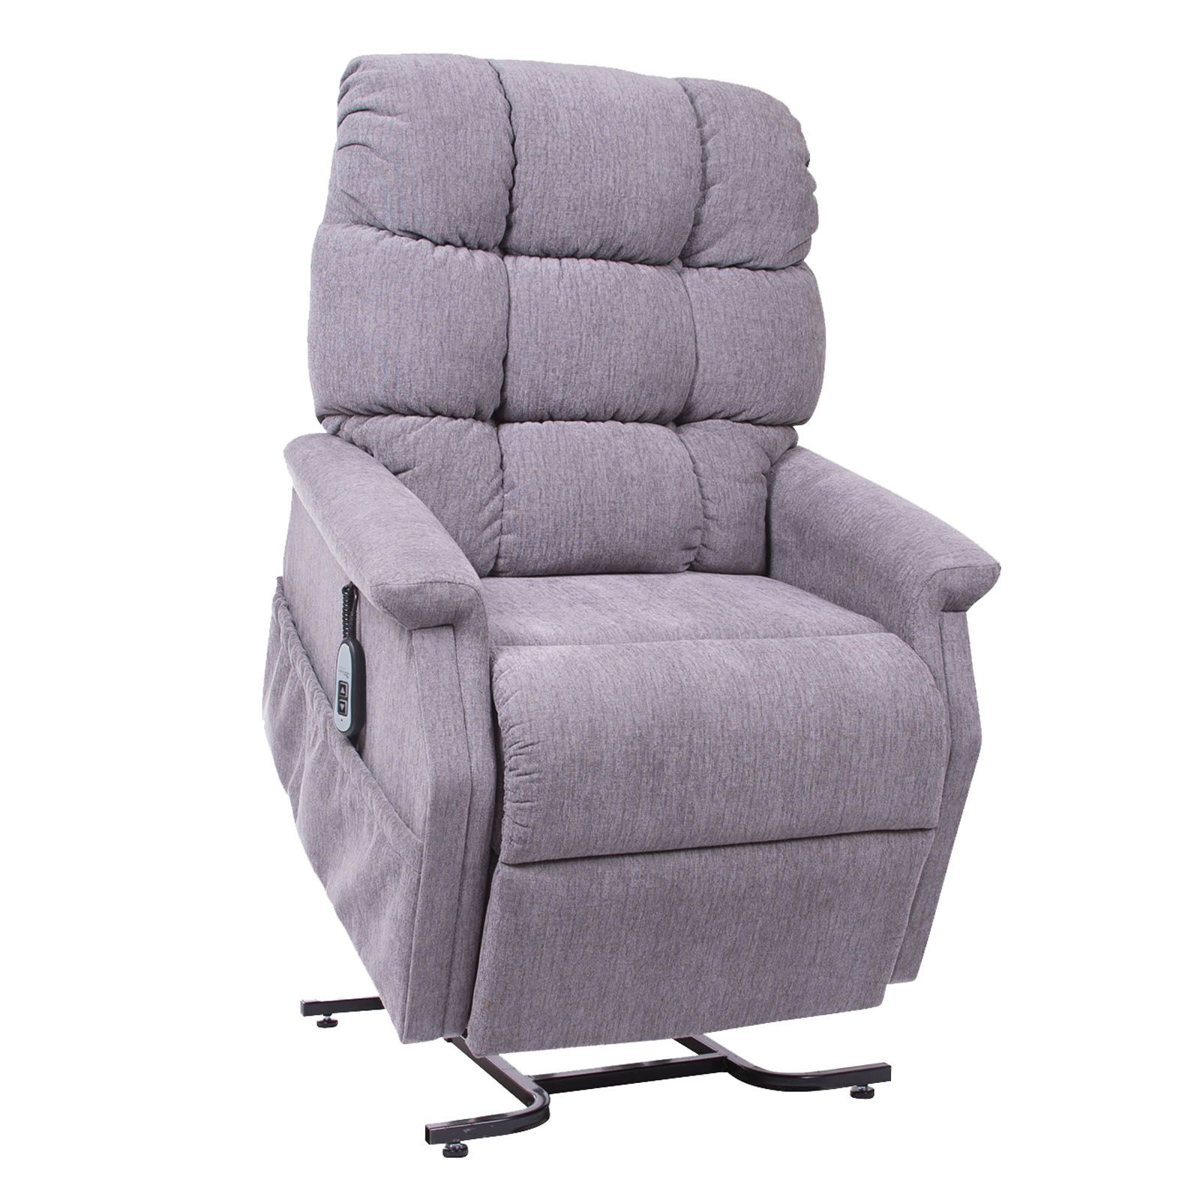 Picture of Tranquility Anchor Chaise Lift Chair